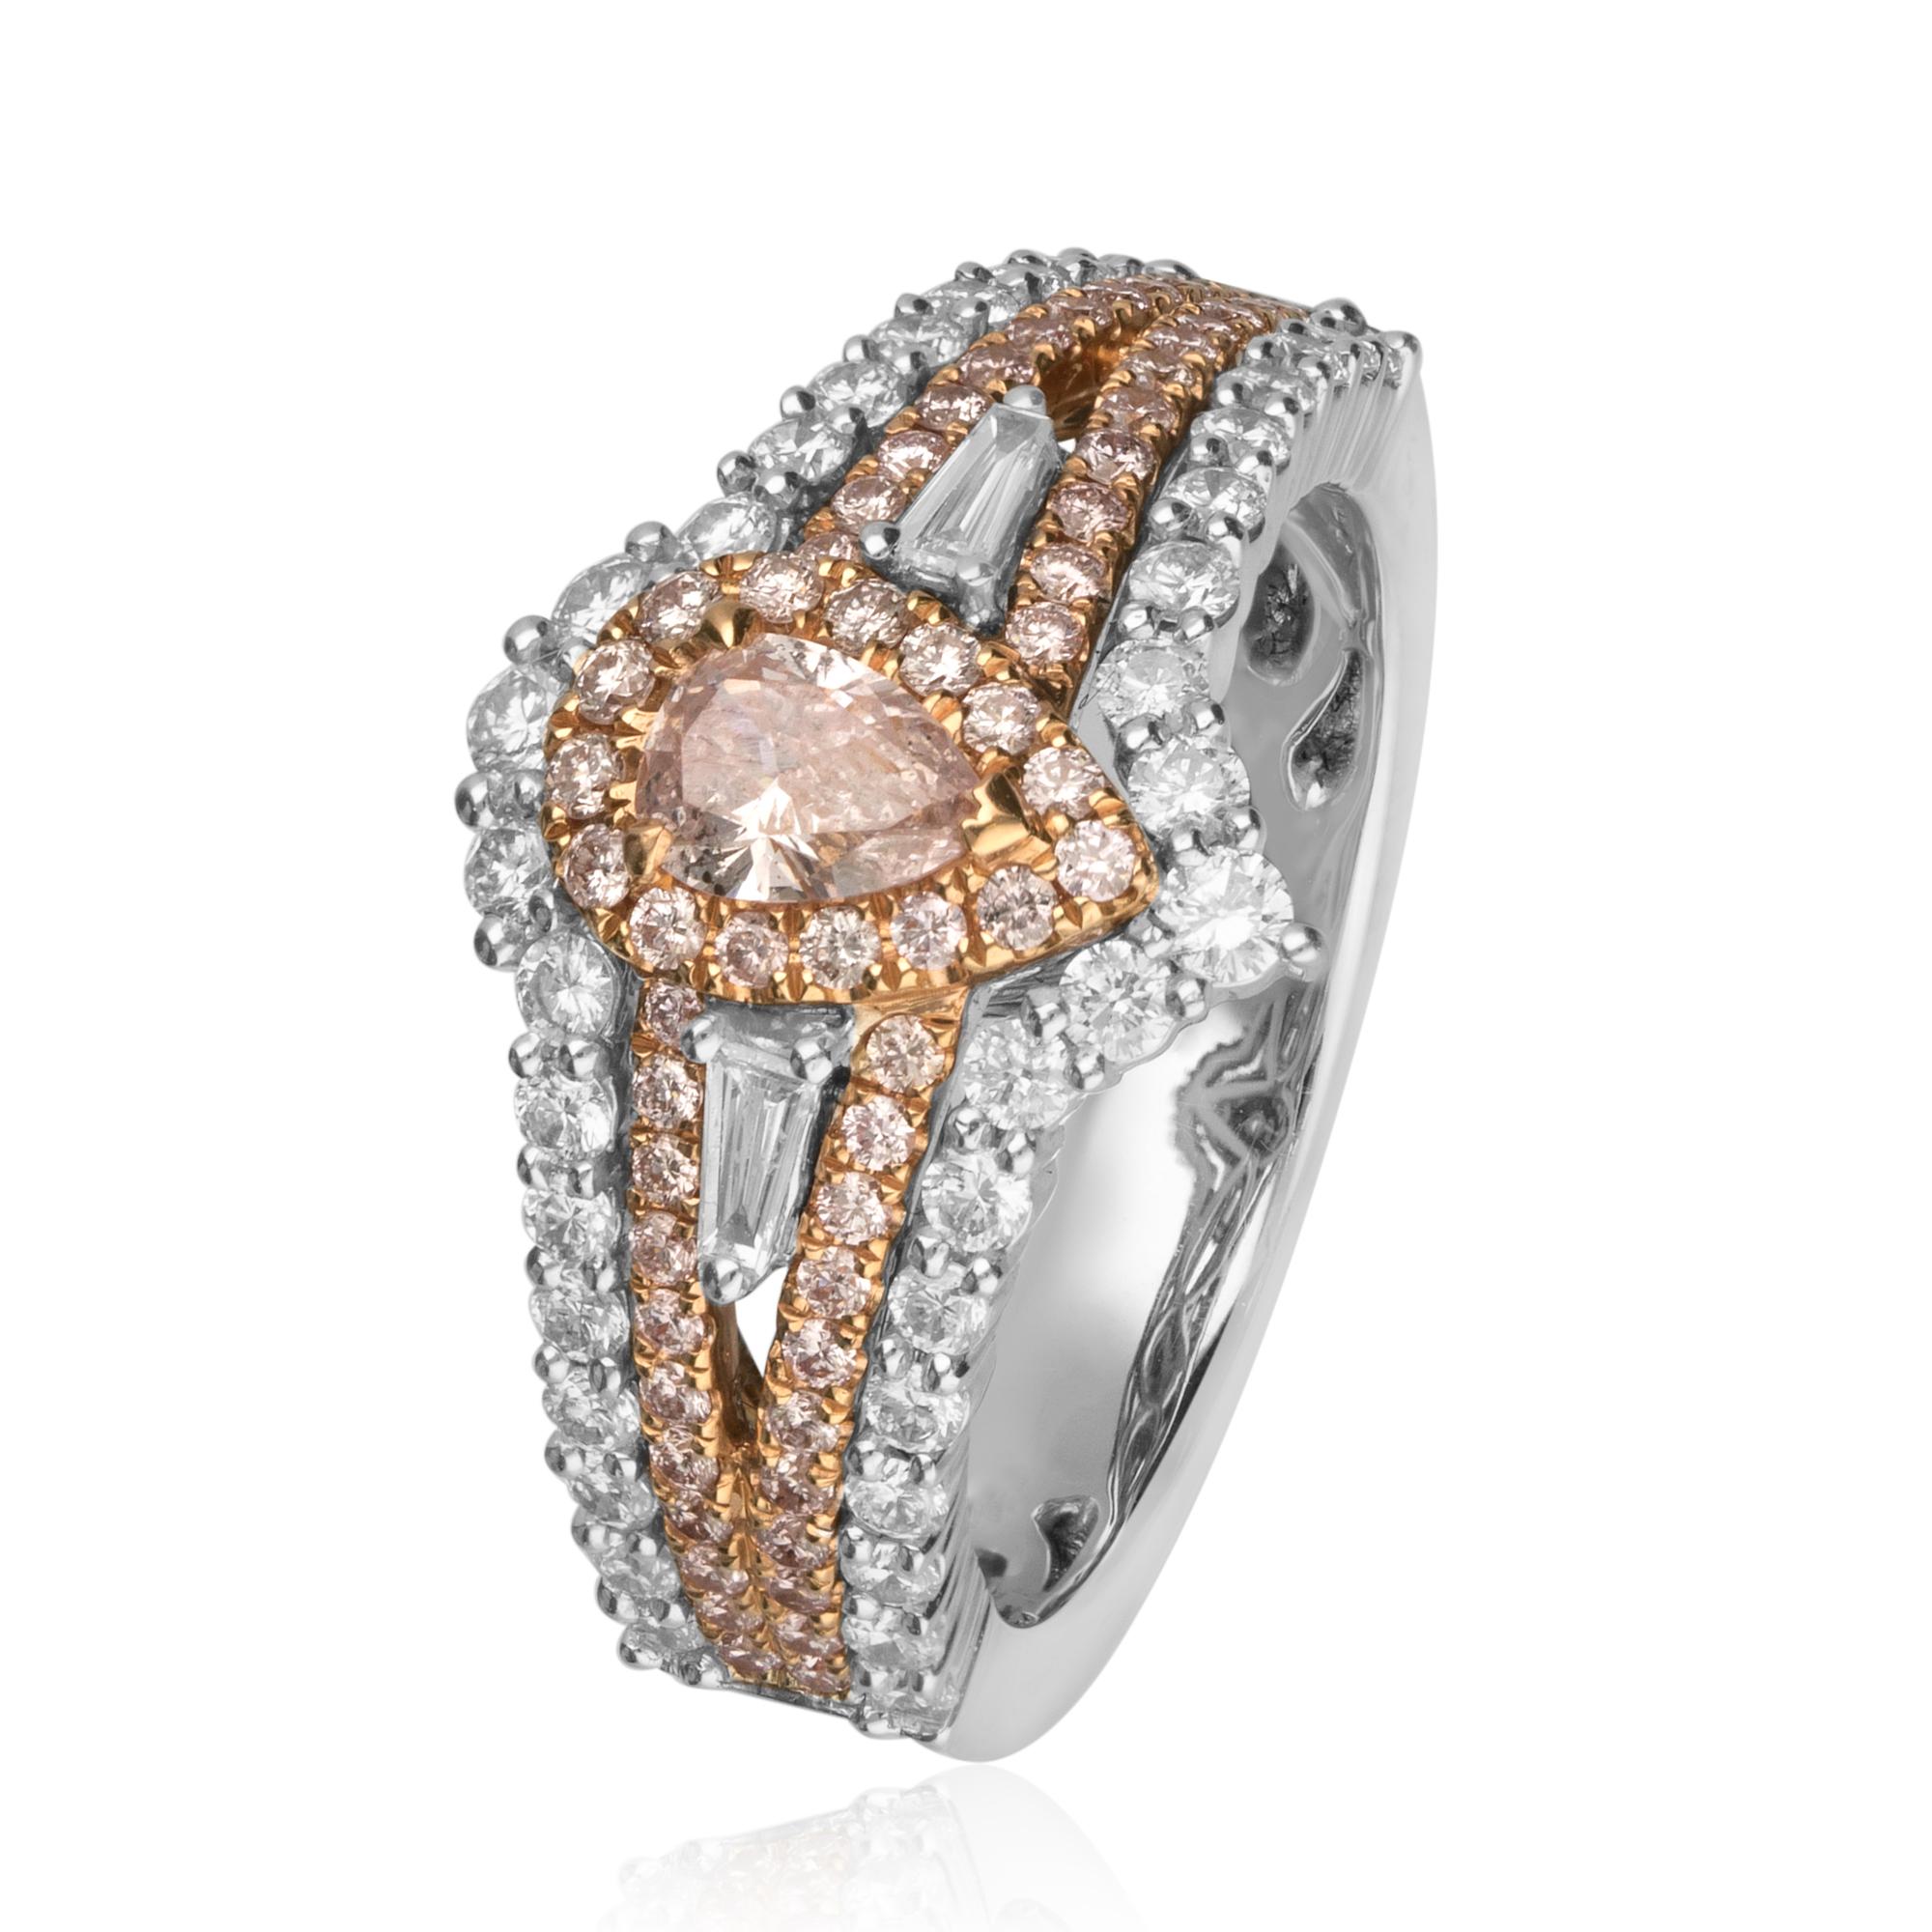 This beautiful Engagement ring is crafted in 18-karat Two Tone (Rose and White) gold. 
It features a GIA certified pear shaped Natural Fancy Pink Diamond 0.30 Carat with SI2 clarity, 59 Pink Diamonds 0.39 Carat, 38 Round Diamonds 0.65 Carat and 2